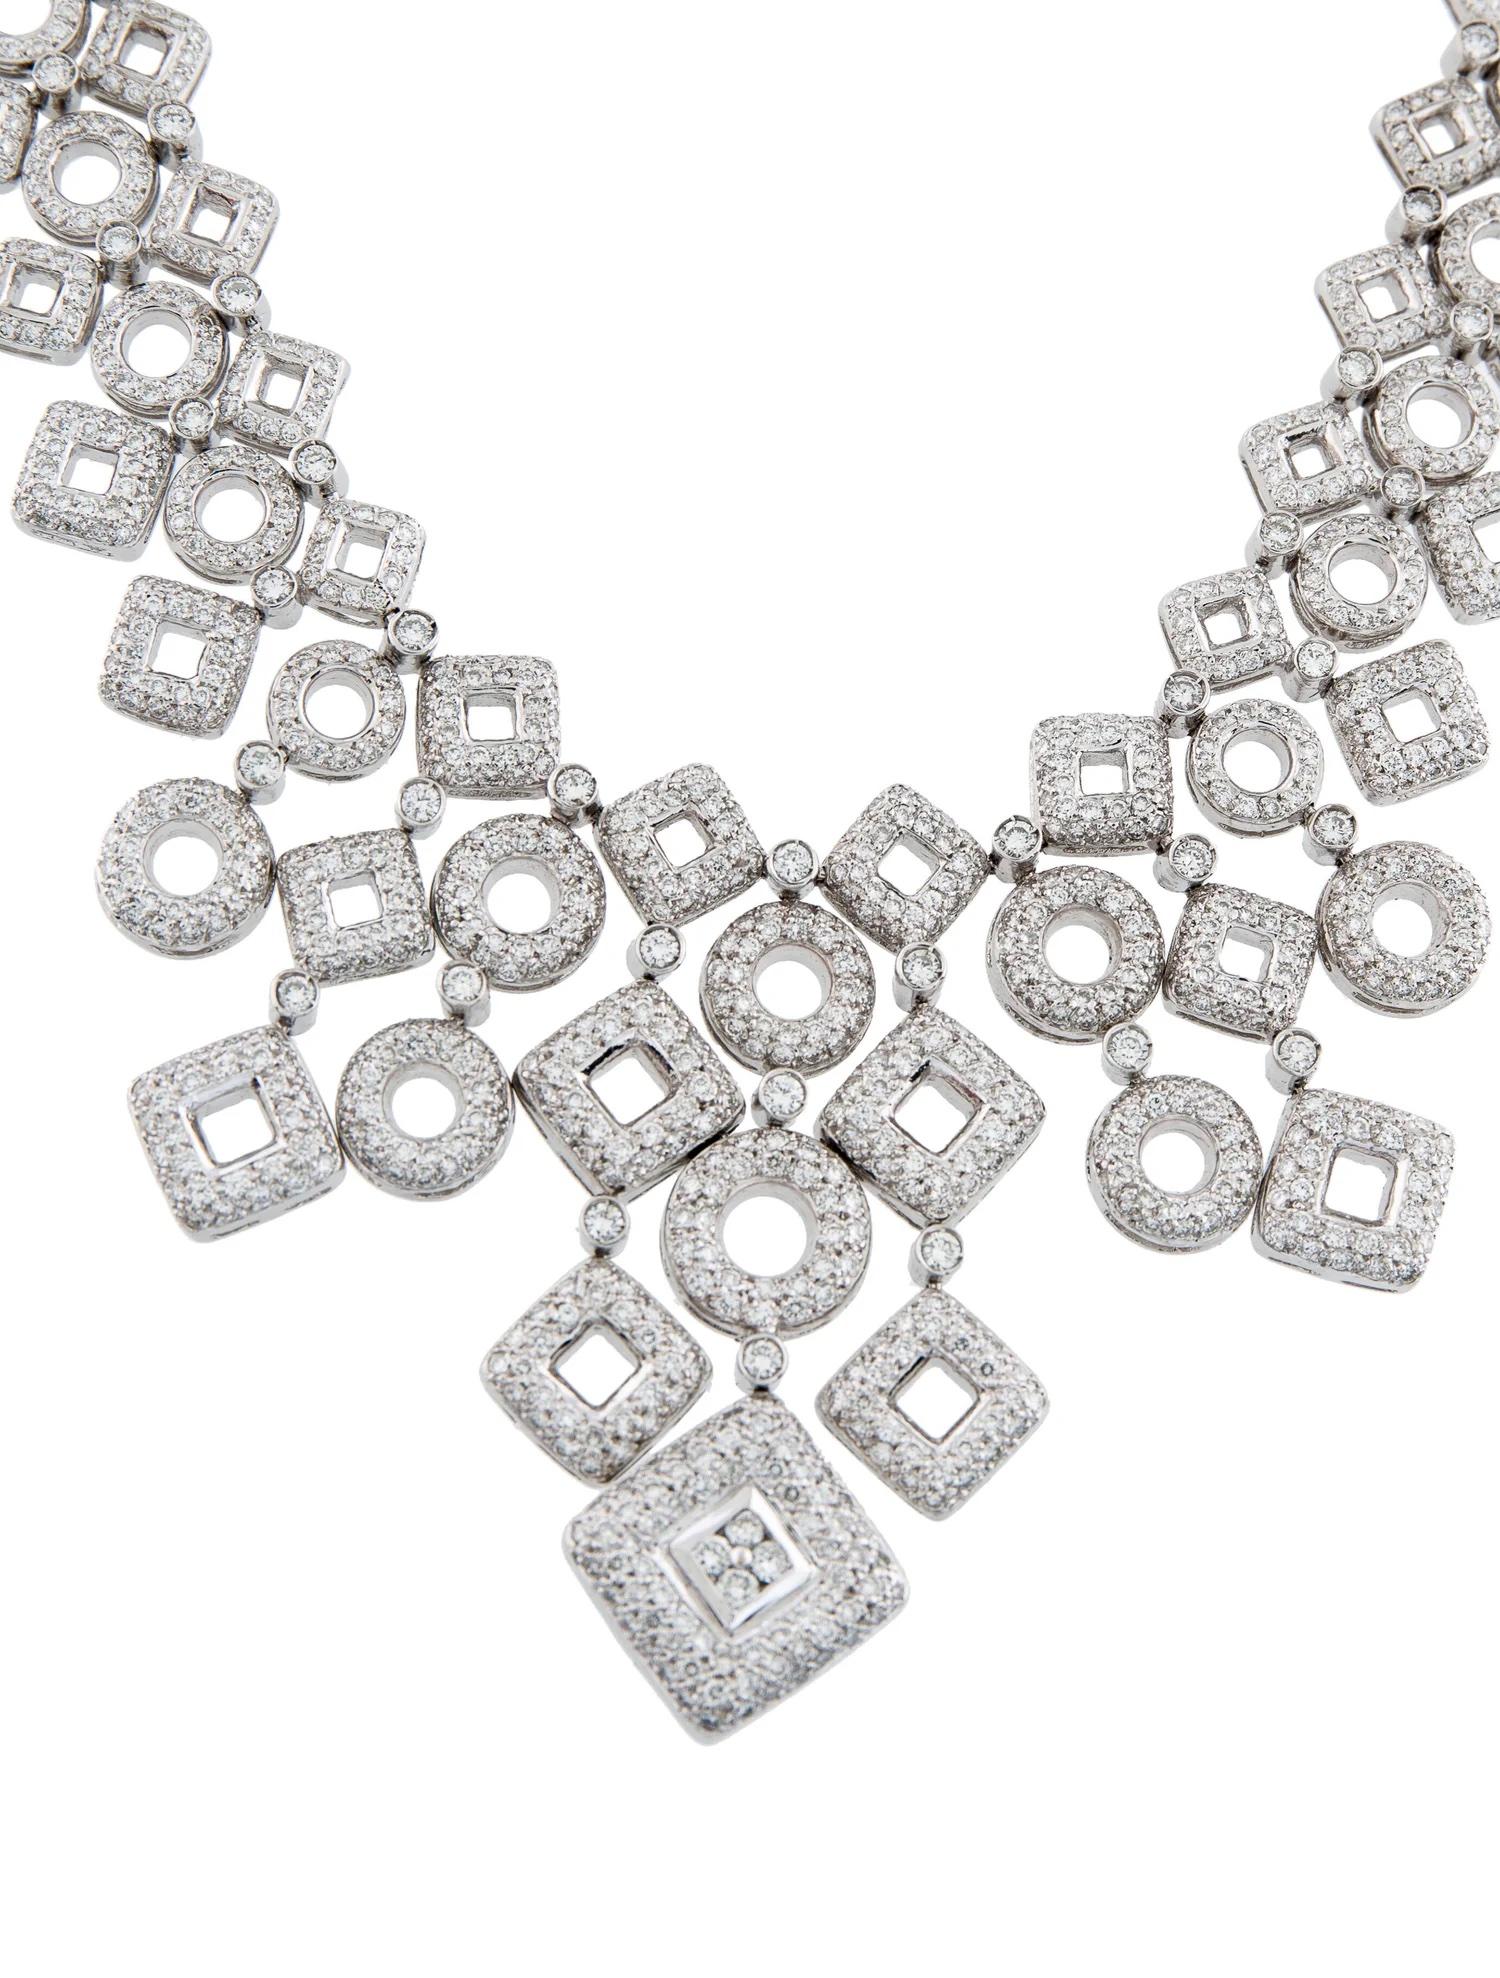 Talk about a show-stopping necklace!

This necklace is set in 18K White Gold with 1,089 Round Diamonds weighing 7.03ctw 
(G-H/SI in Quality).

It is 17